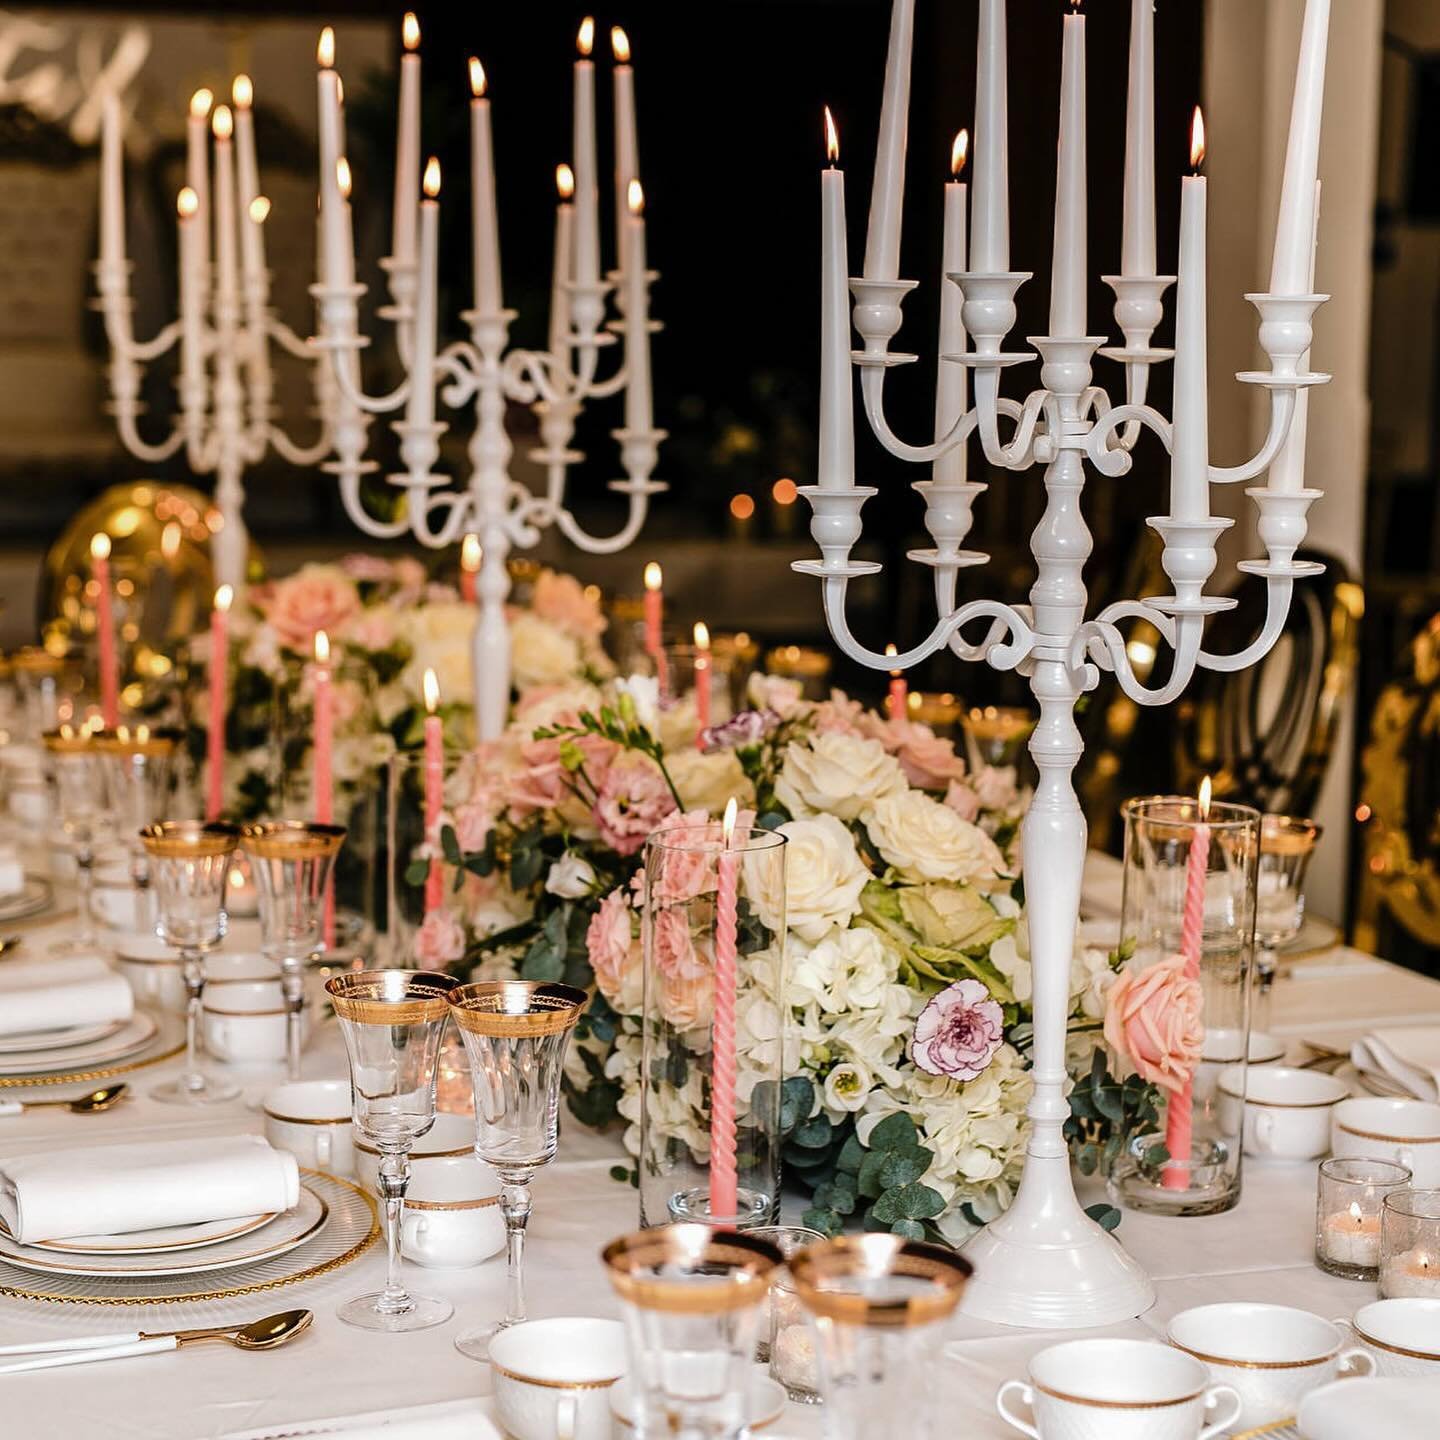 Looking to design and style your table for your special celebration?
~
Look no further. Contact us using the link in our bio.
~
Designed @perfectevent4u 
Photography @remi_benson 
:
:
:
:
:
#weddingreceptiondecor #weddingday #weddingplanners #eventpl